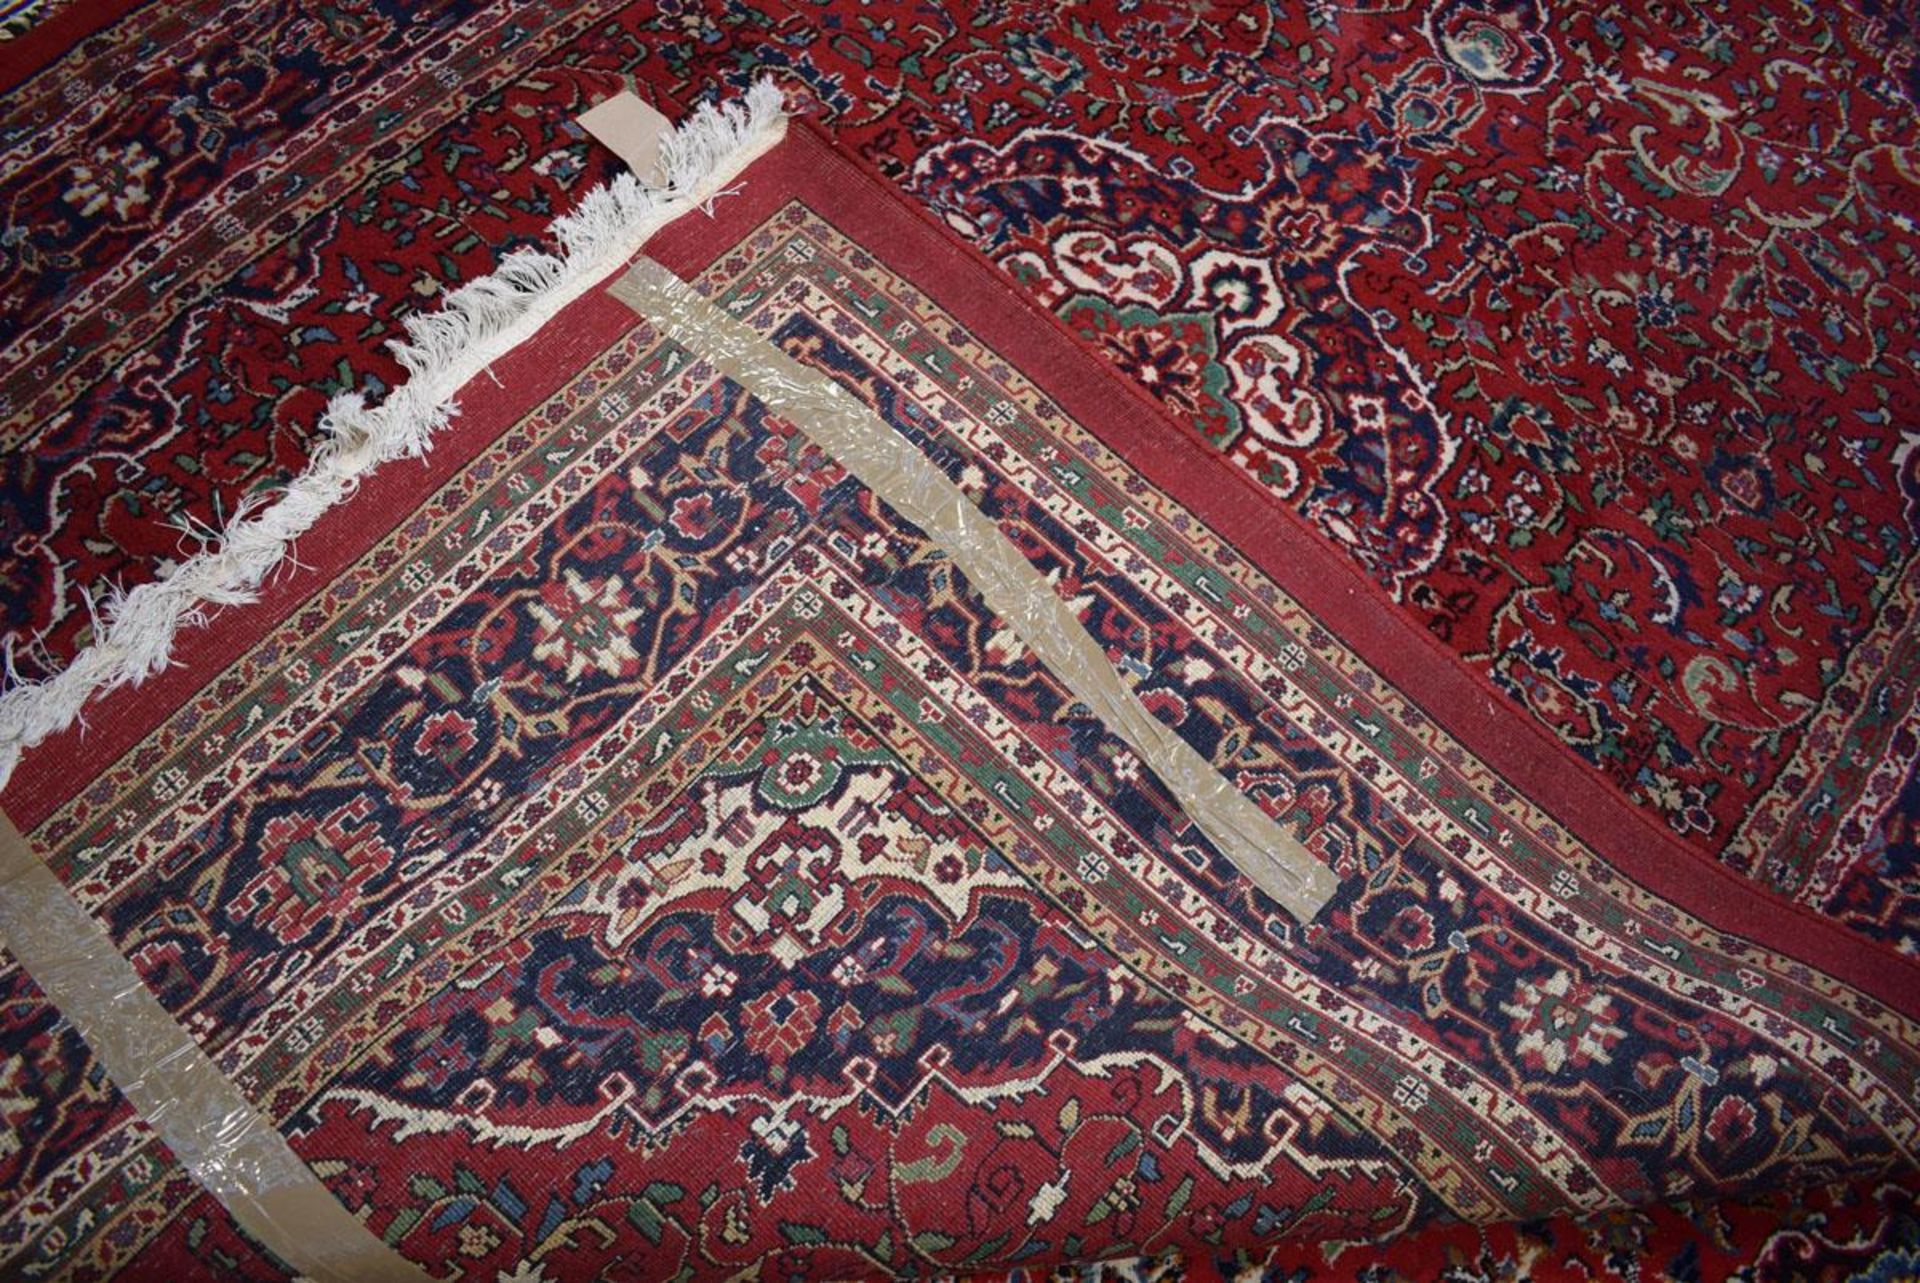 (11) Iranian carpet, red background and blue motifs, approx. 2 x 3m - Image 3 of 3